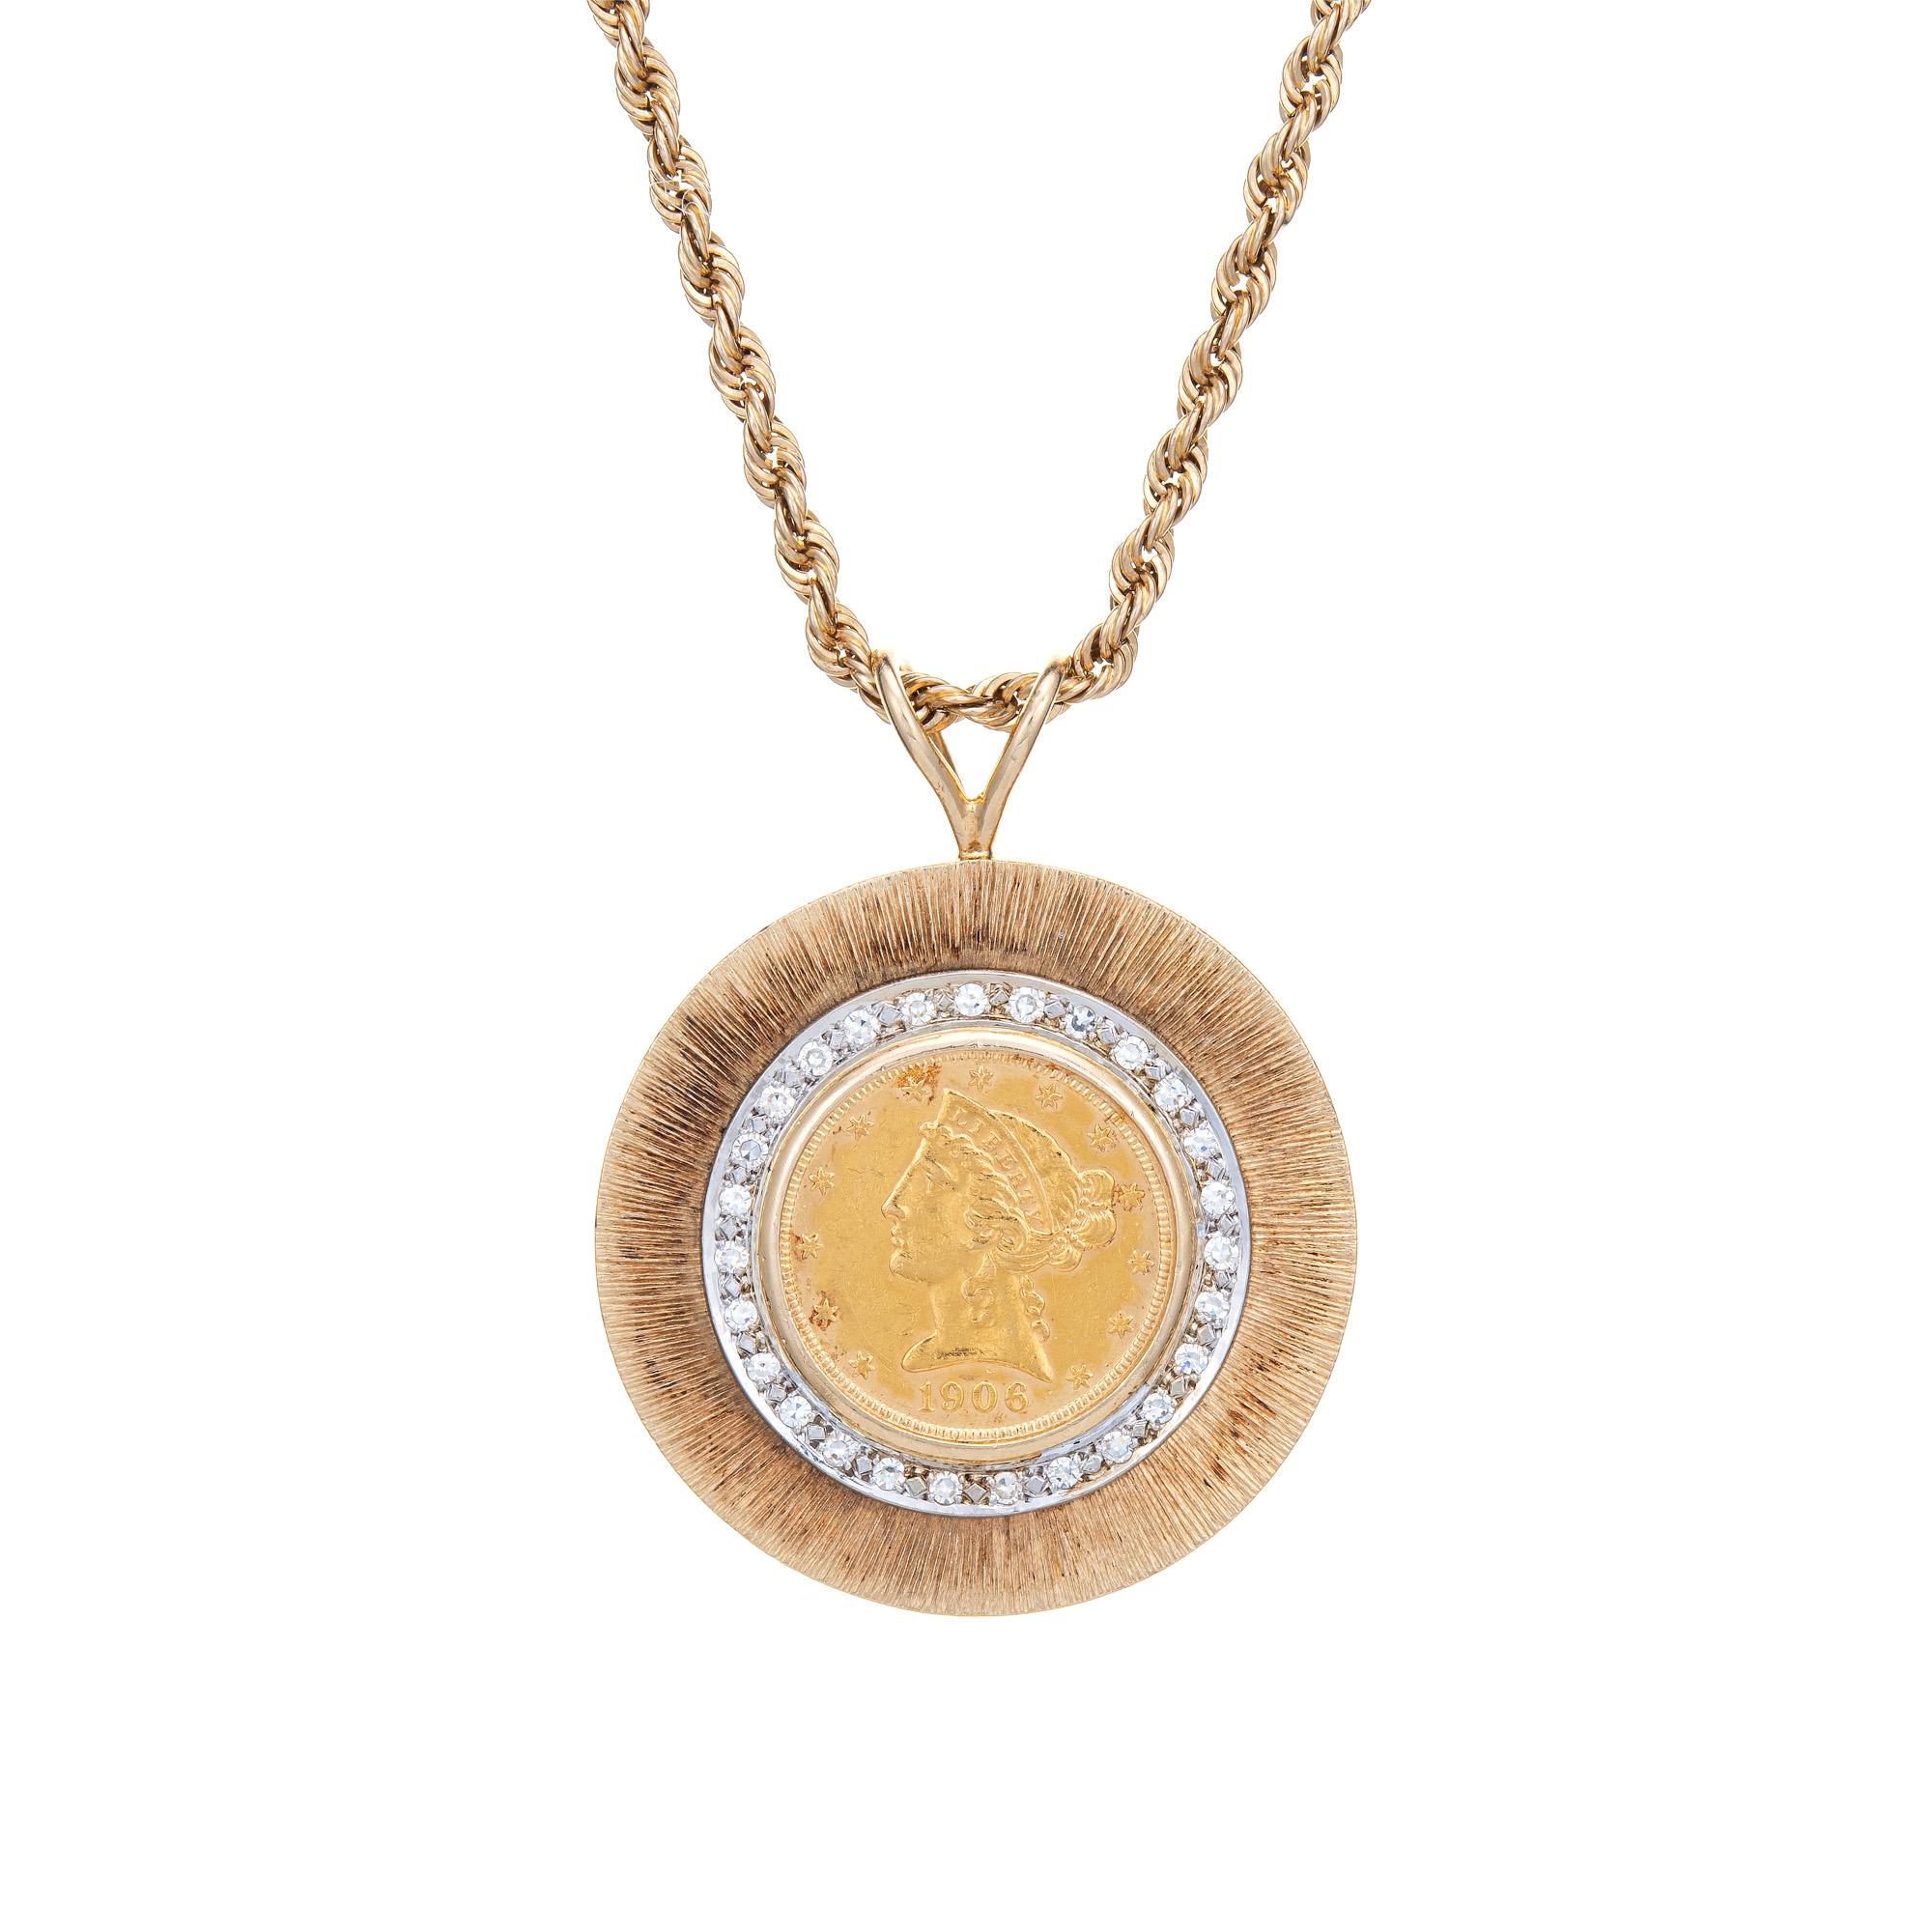 Finely detailed vintage diamond coin medallion necklace crafted in 14 karat yellow gold (the coin is 90% gold). The necklace is circa 1960s to 1970s.

Single cut diamonds total an estimated 0.26 carats (estimated at G-H color and VS2 clarity).

The